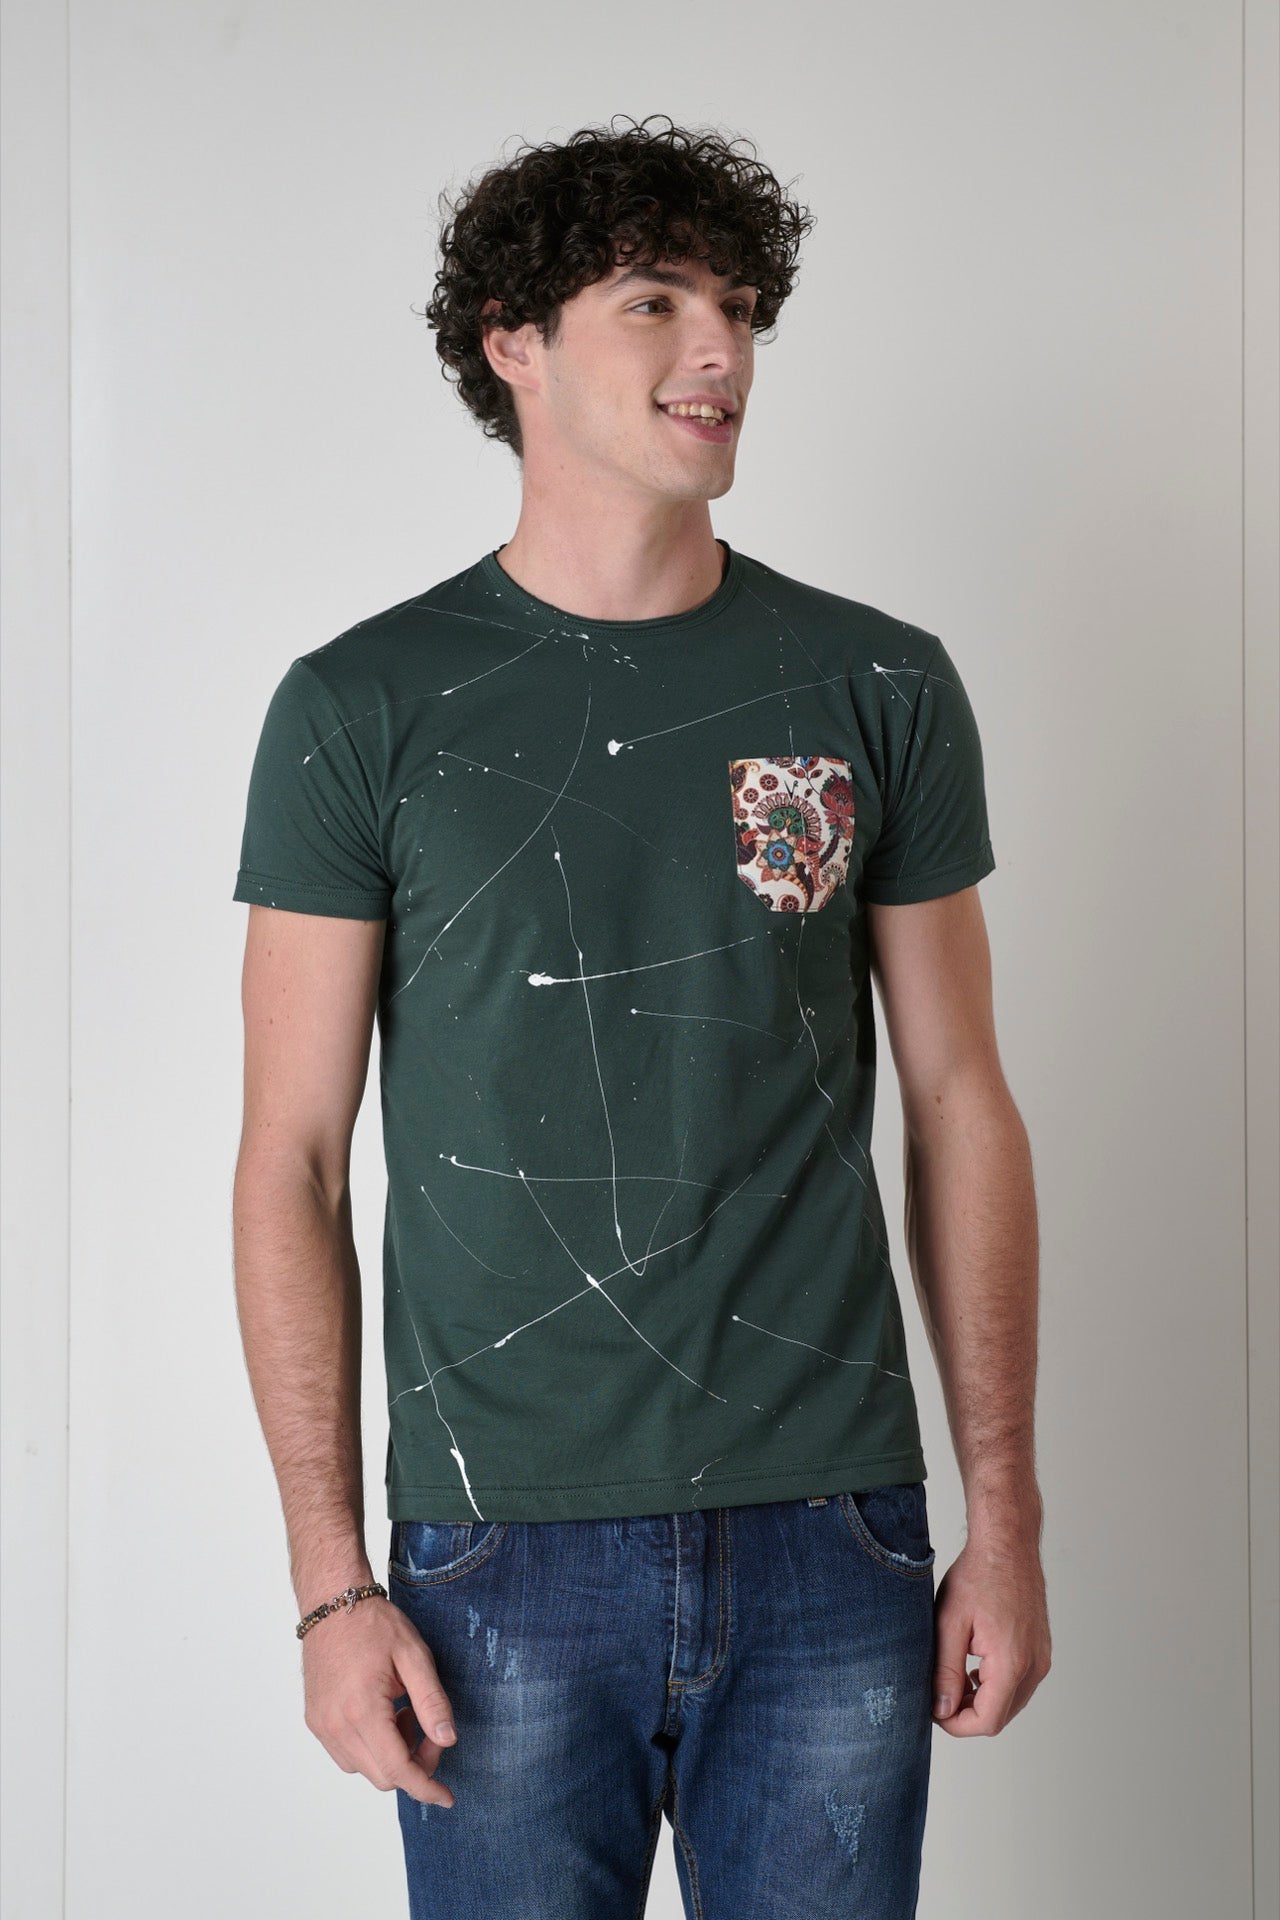 Green T-Shirt with V2 fabric pocket and paint splatters